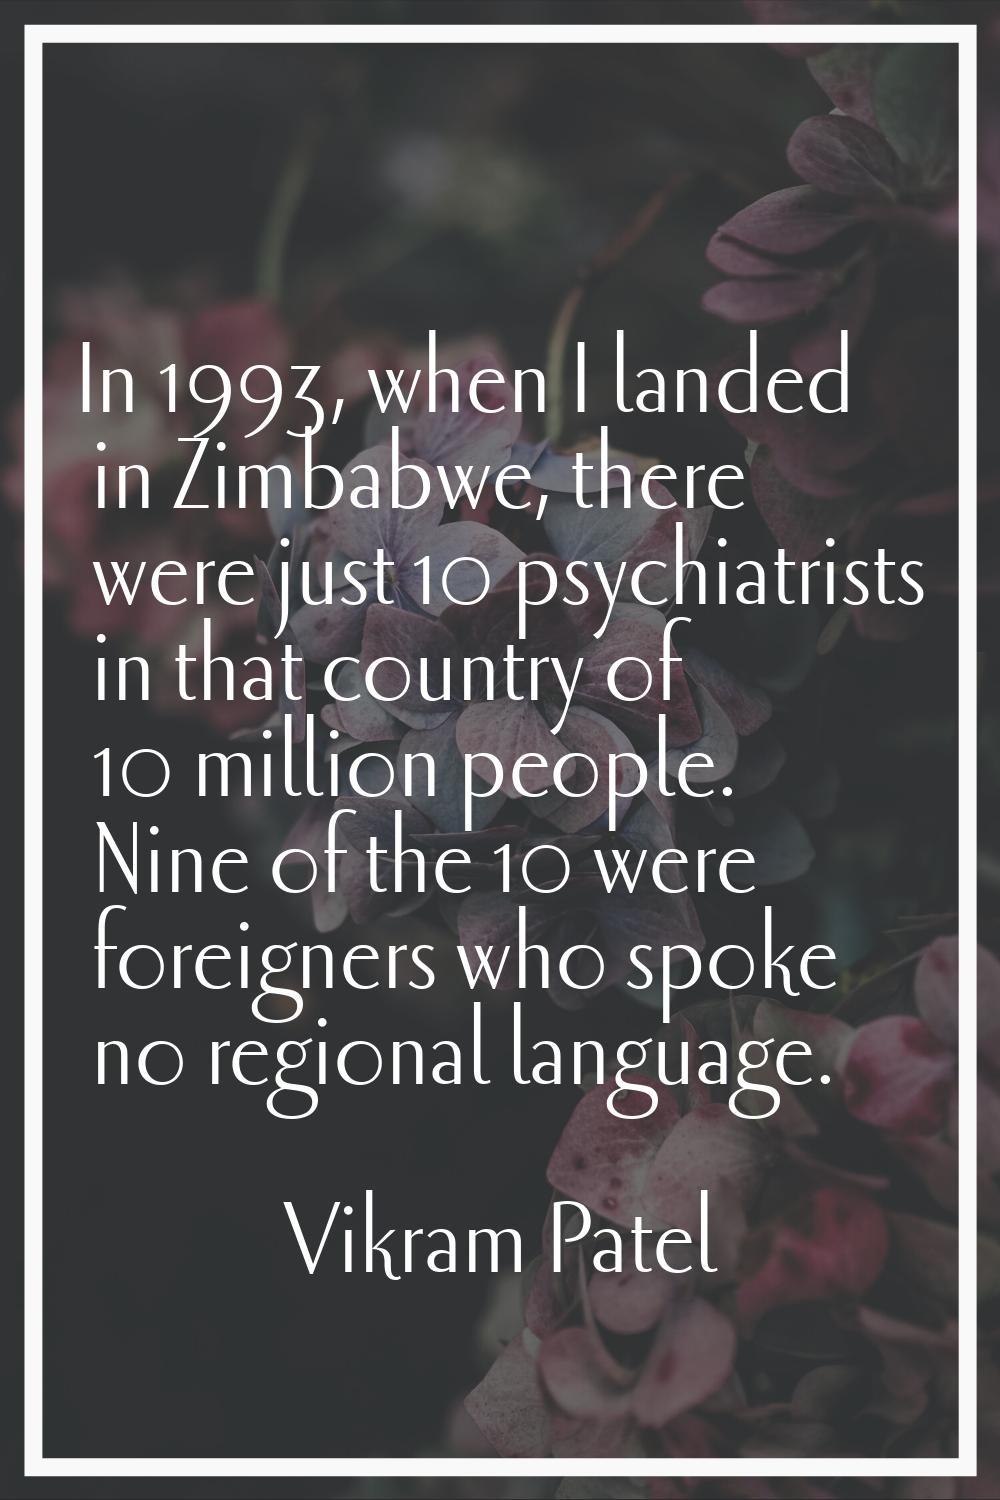 In 1993, when I landed in Zimbabwe, there were just 10 psychiatrists in that country of 10 million 